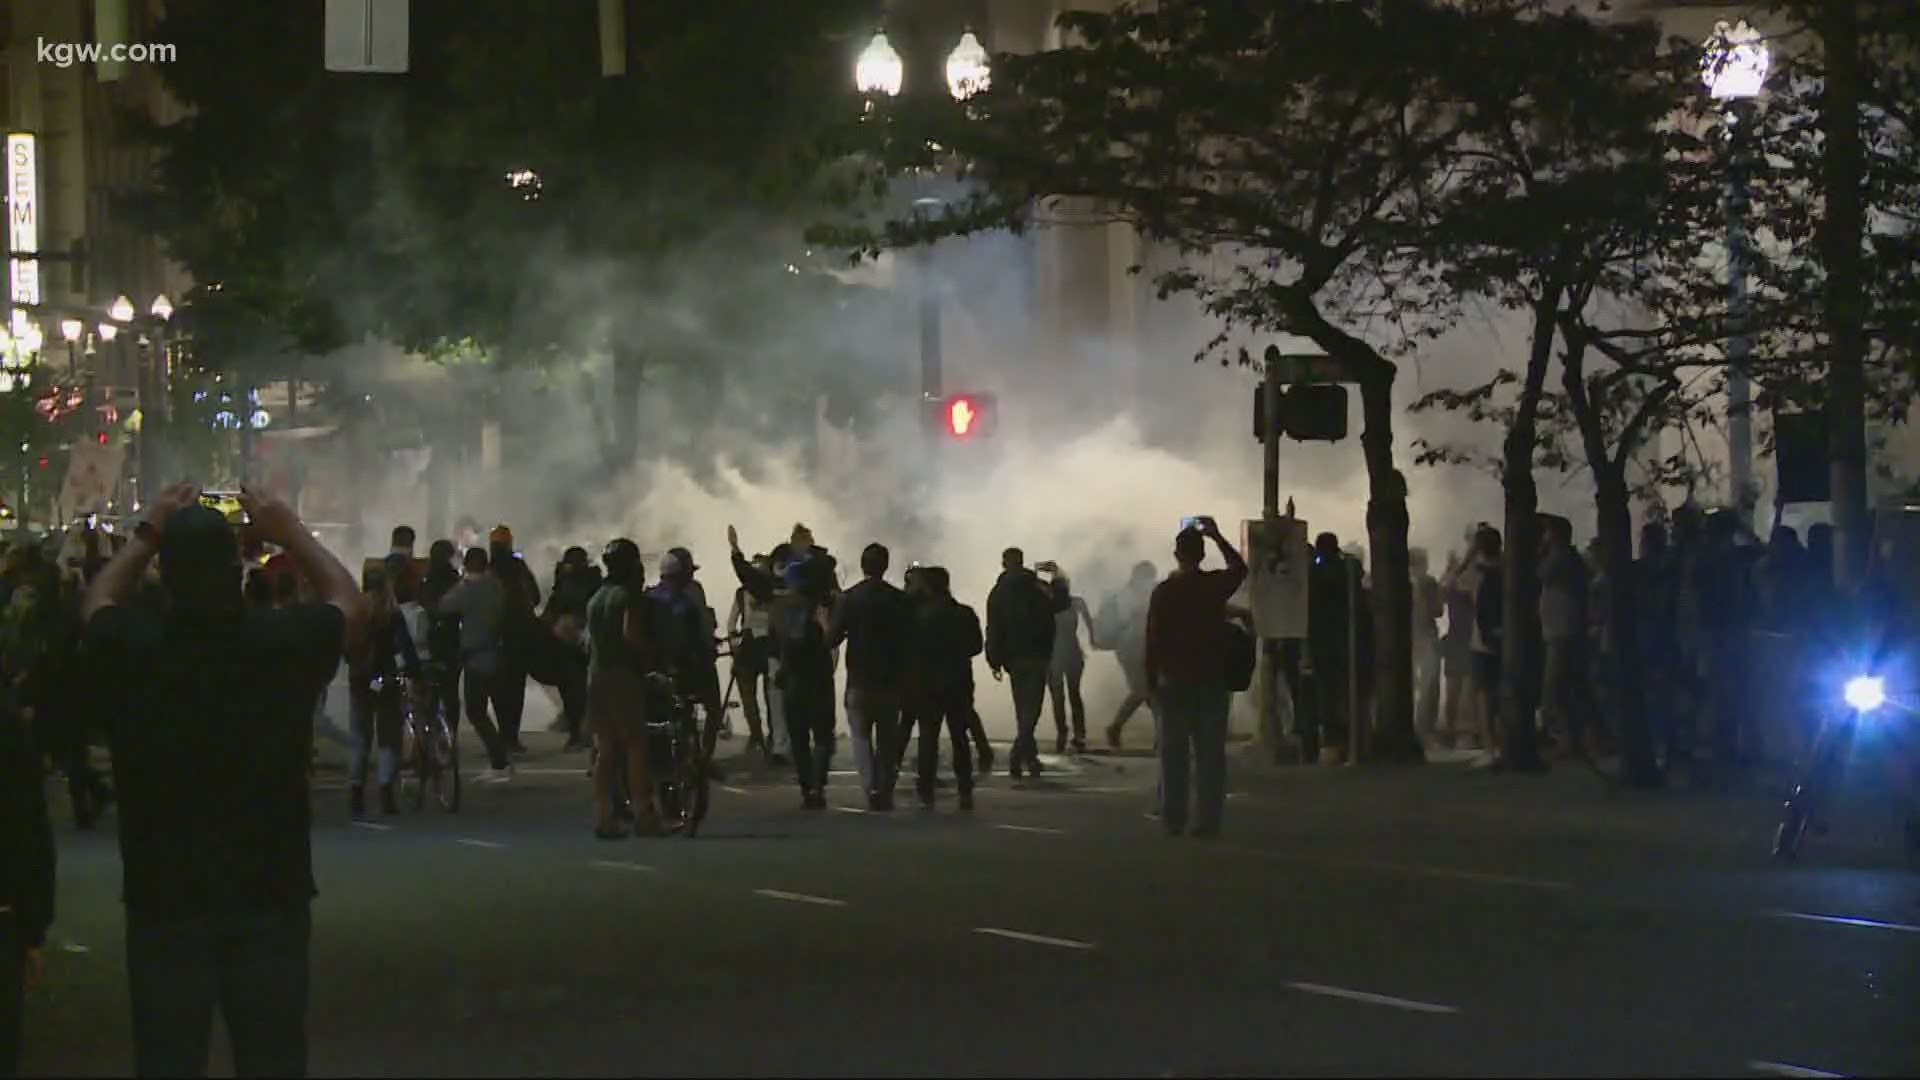 Some residents told KGW they are kept awake at night by the fireworks, flash bangs, and tear gas.